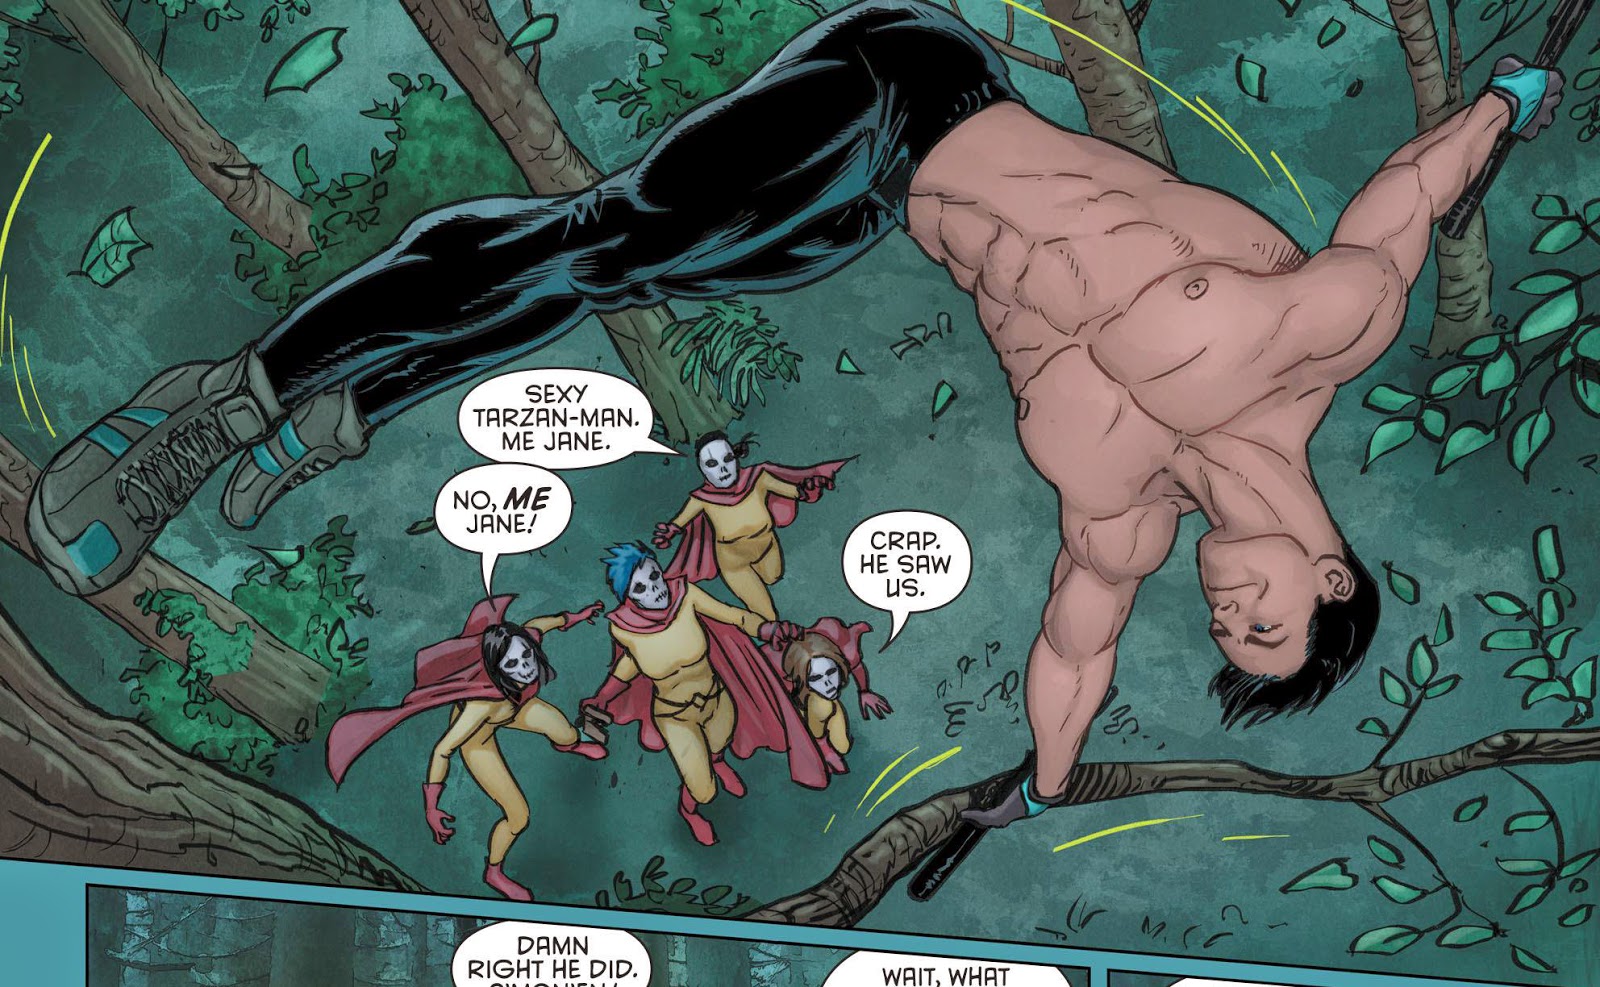 Shirtless Dick Grayson Being Chased By Girls.